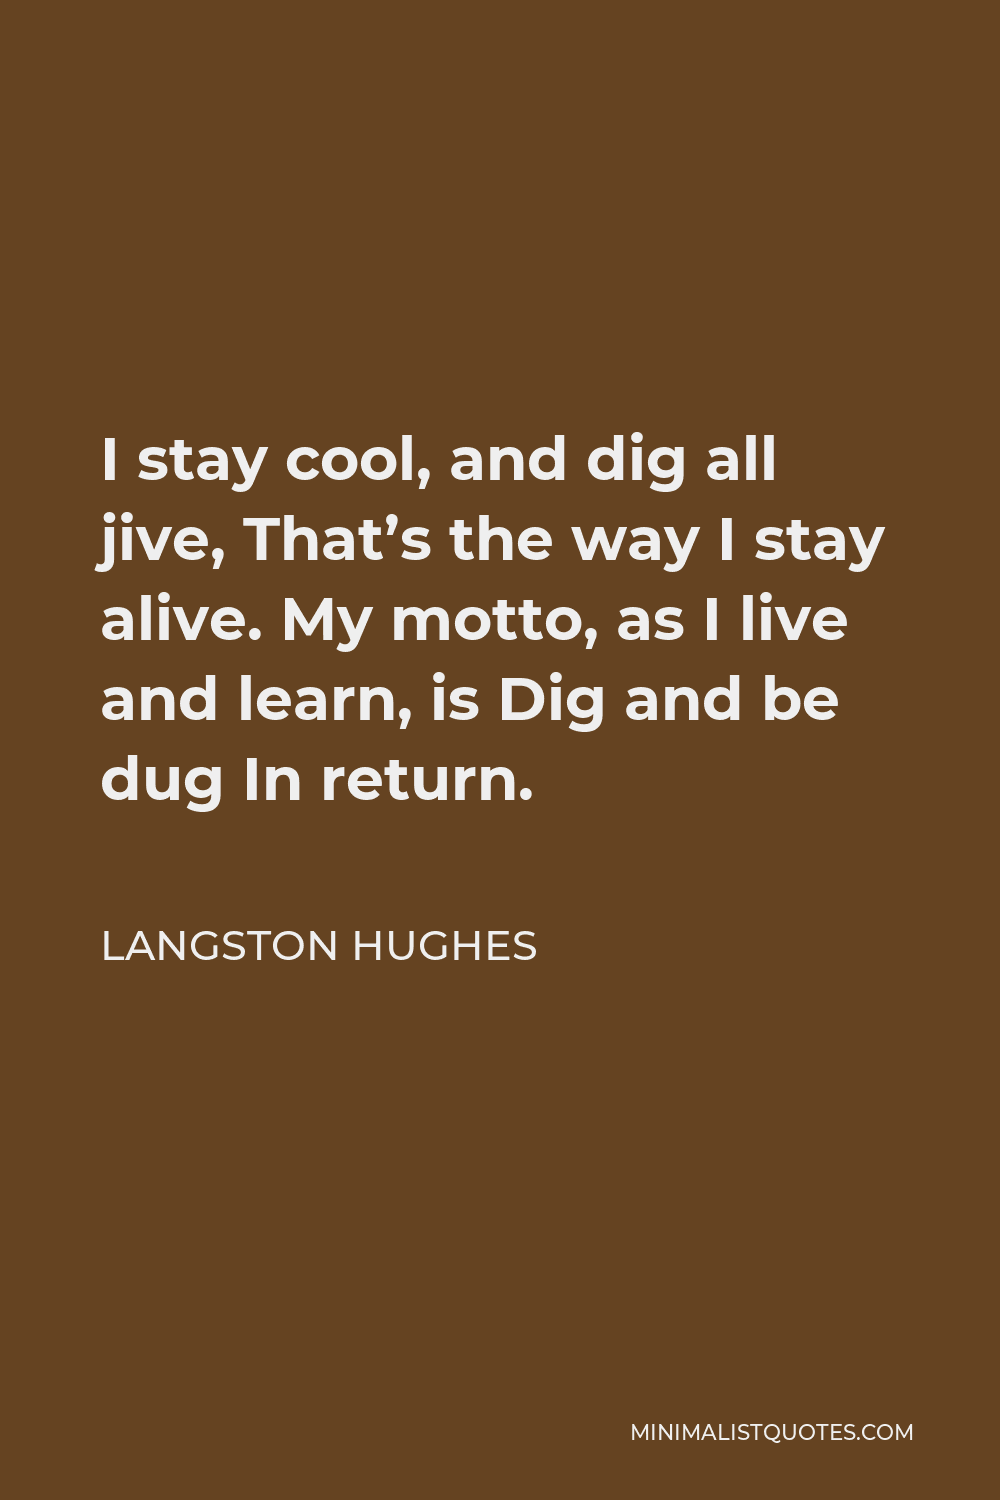 Langston Hughes Quote - I stay cool, and dig all jive, That’s the way I stay alive. My motto, as I live and learn, is Dig and be dug In return.